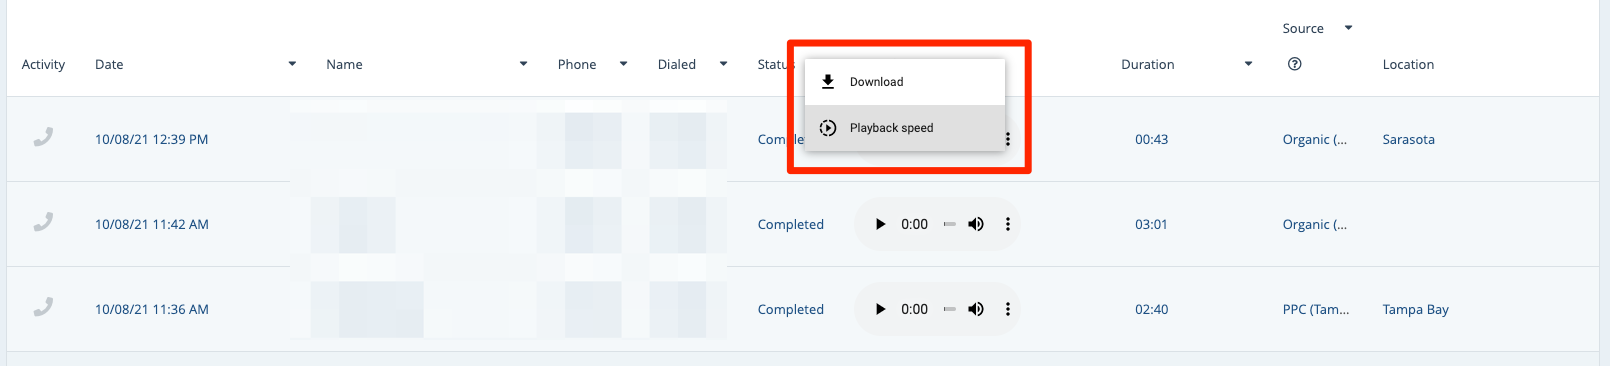 Download_playback_speed.png